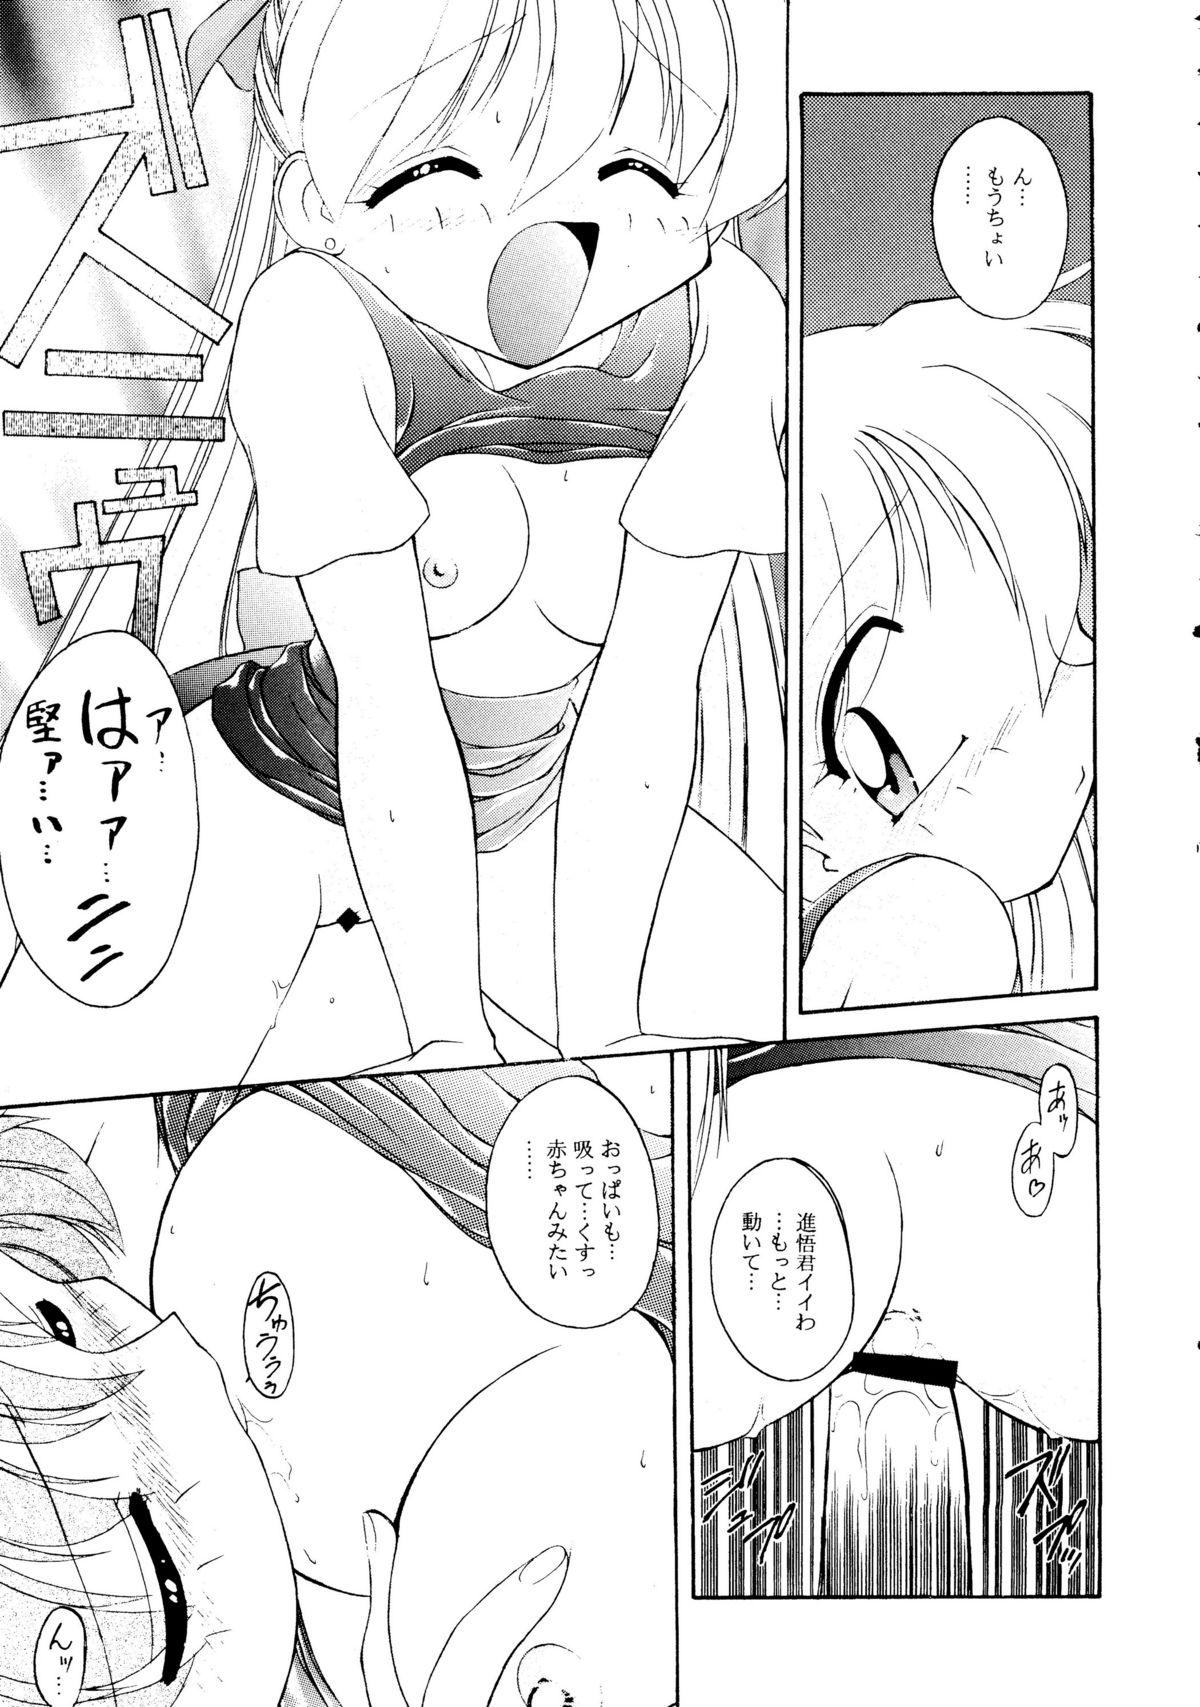 Girls HABER 8 SILVER MOON - Sailor moon Large - Page 10